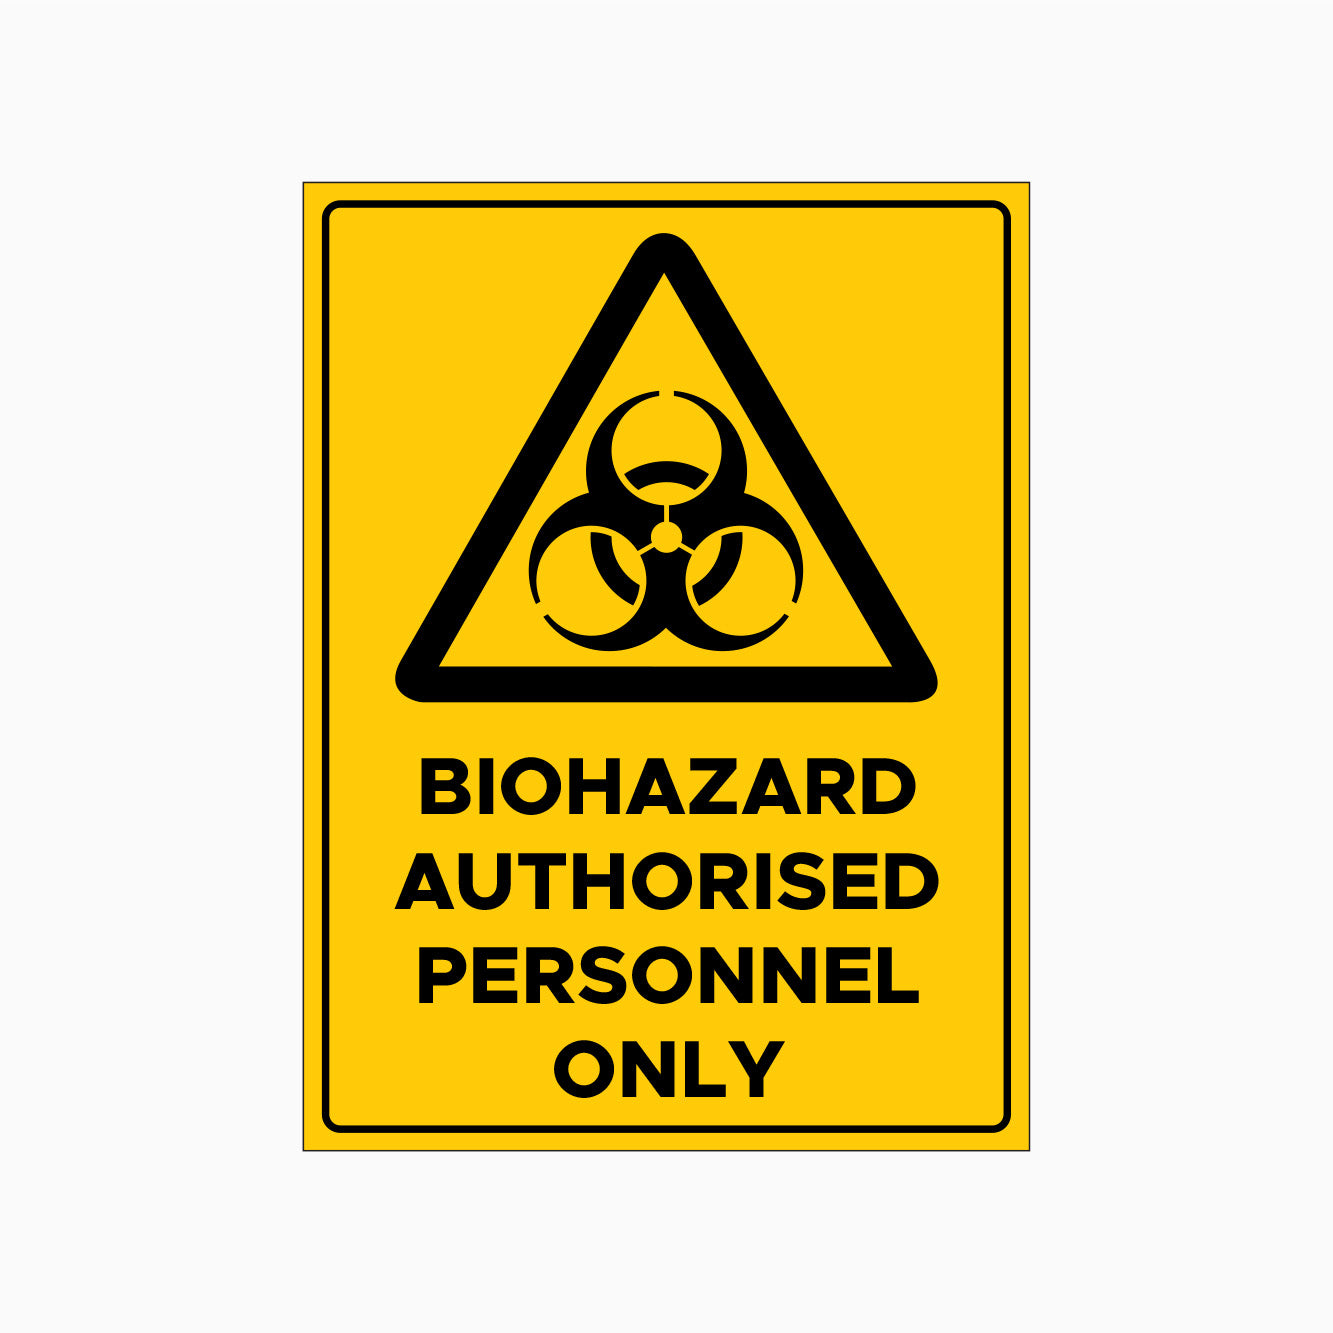 BIOHAZARD AUTHORISED PERSONNEL ONLY SIGN